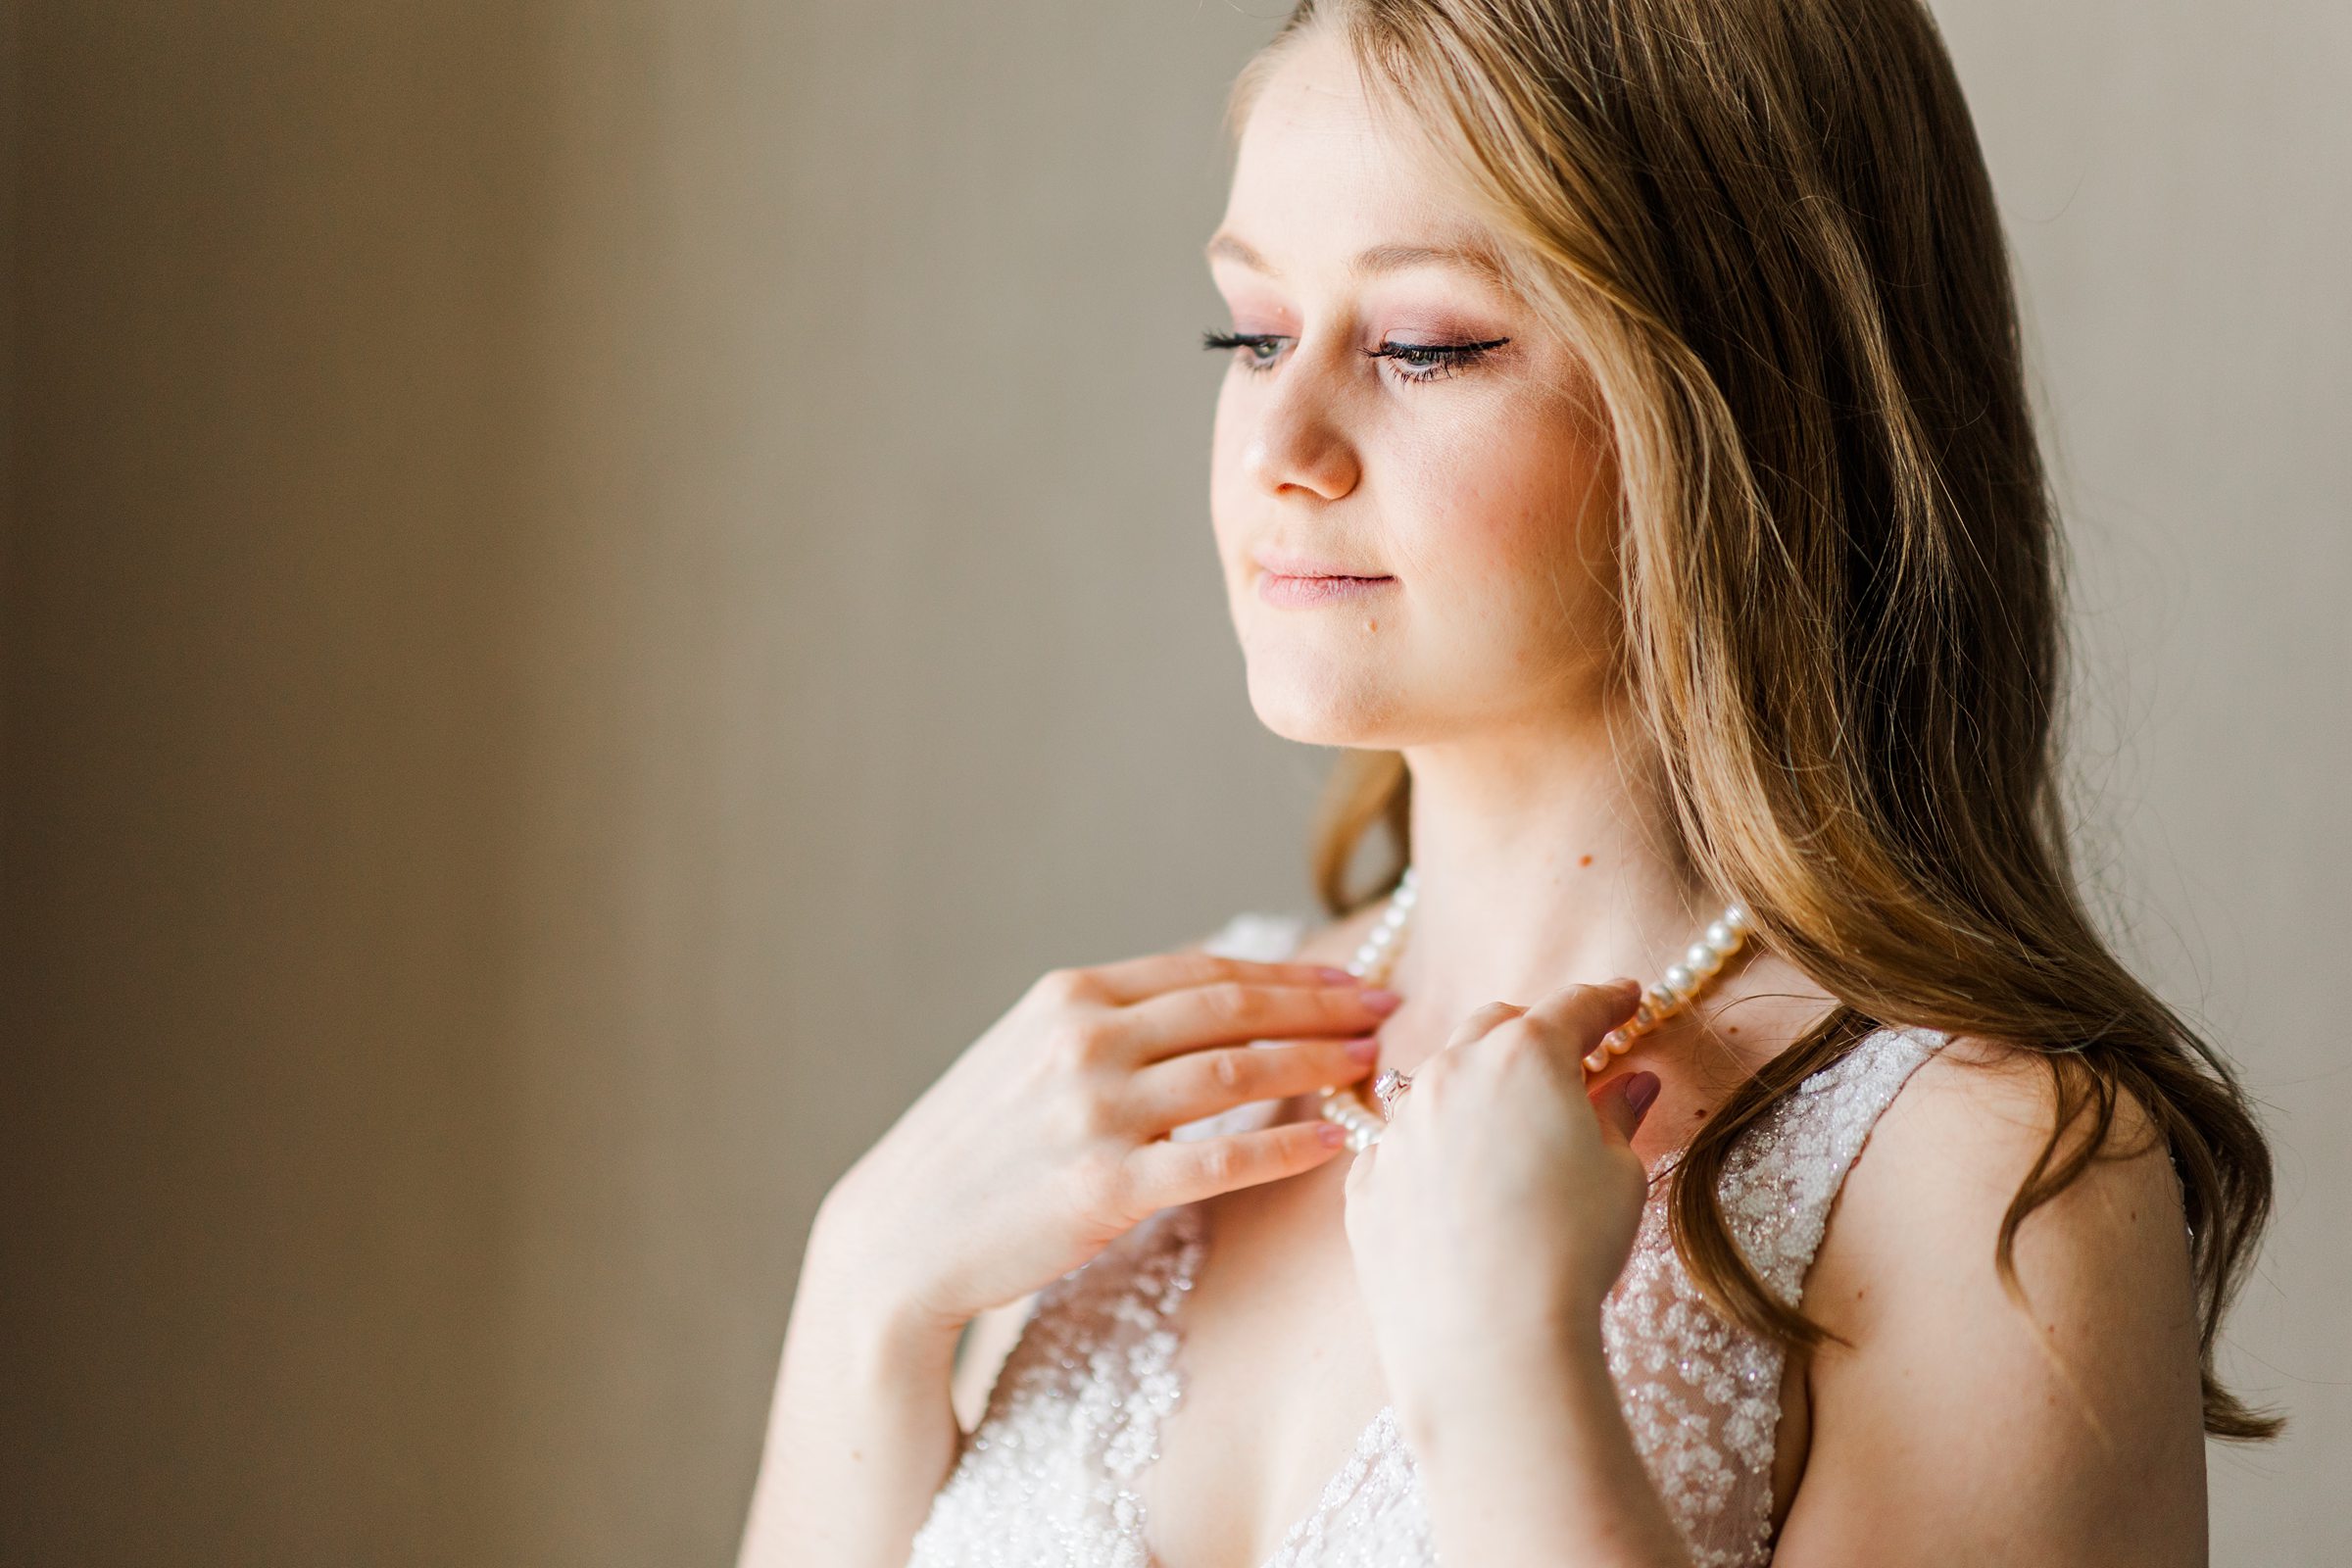 Bride gets ready for her wedding day in Naperville, Illinois, Photo Taken by Austin Wedding Photographers, Joanna & Brett Photography